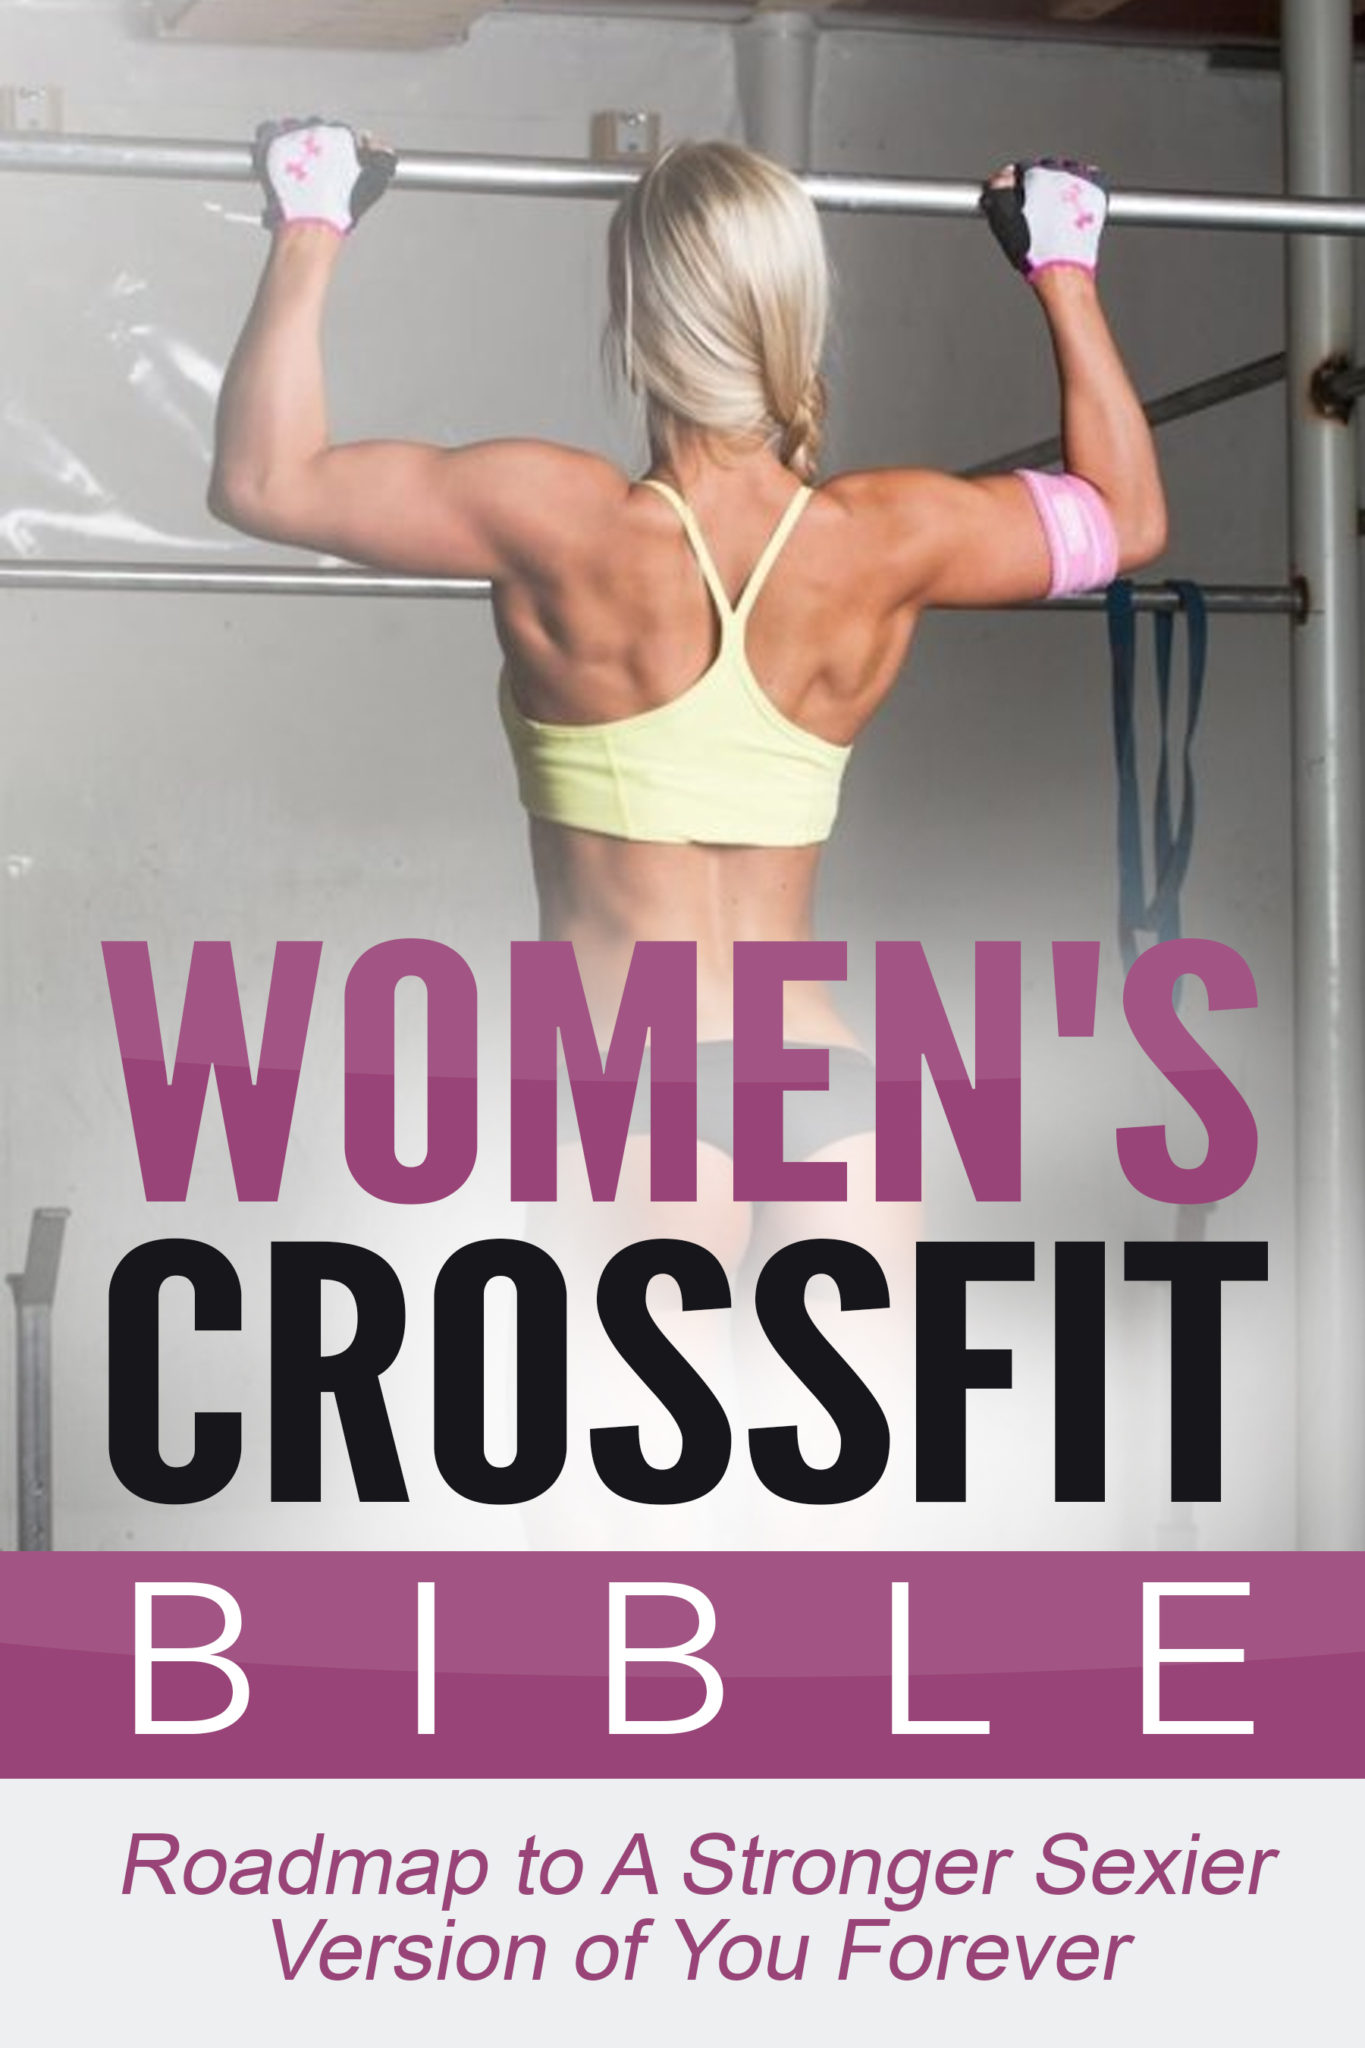 FREE: Women’s Crossfit Bible: Roadmap To A Stronger Sexier Version Of You Forever by Vanessa Aqquati